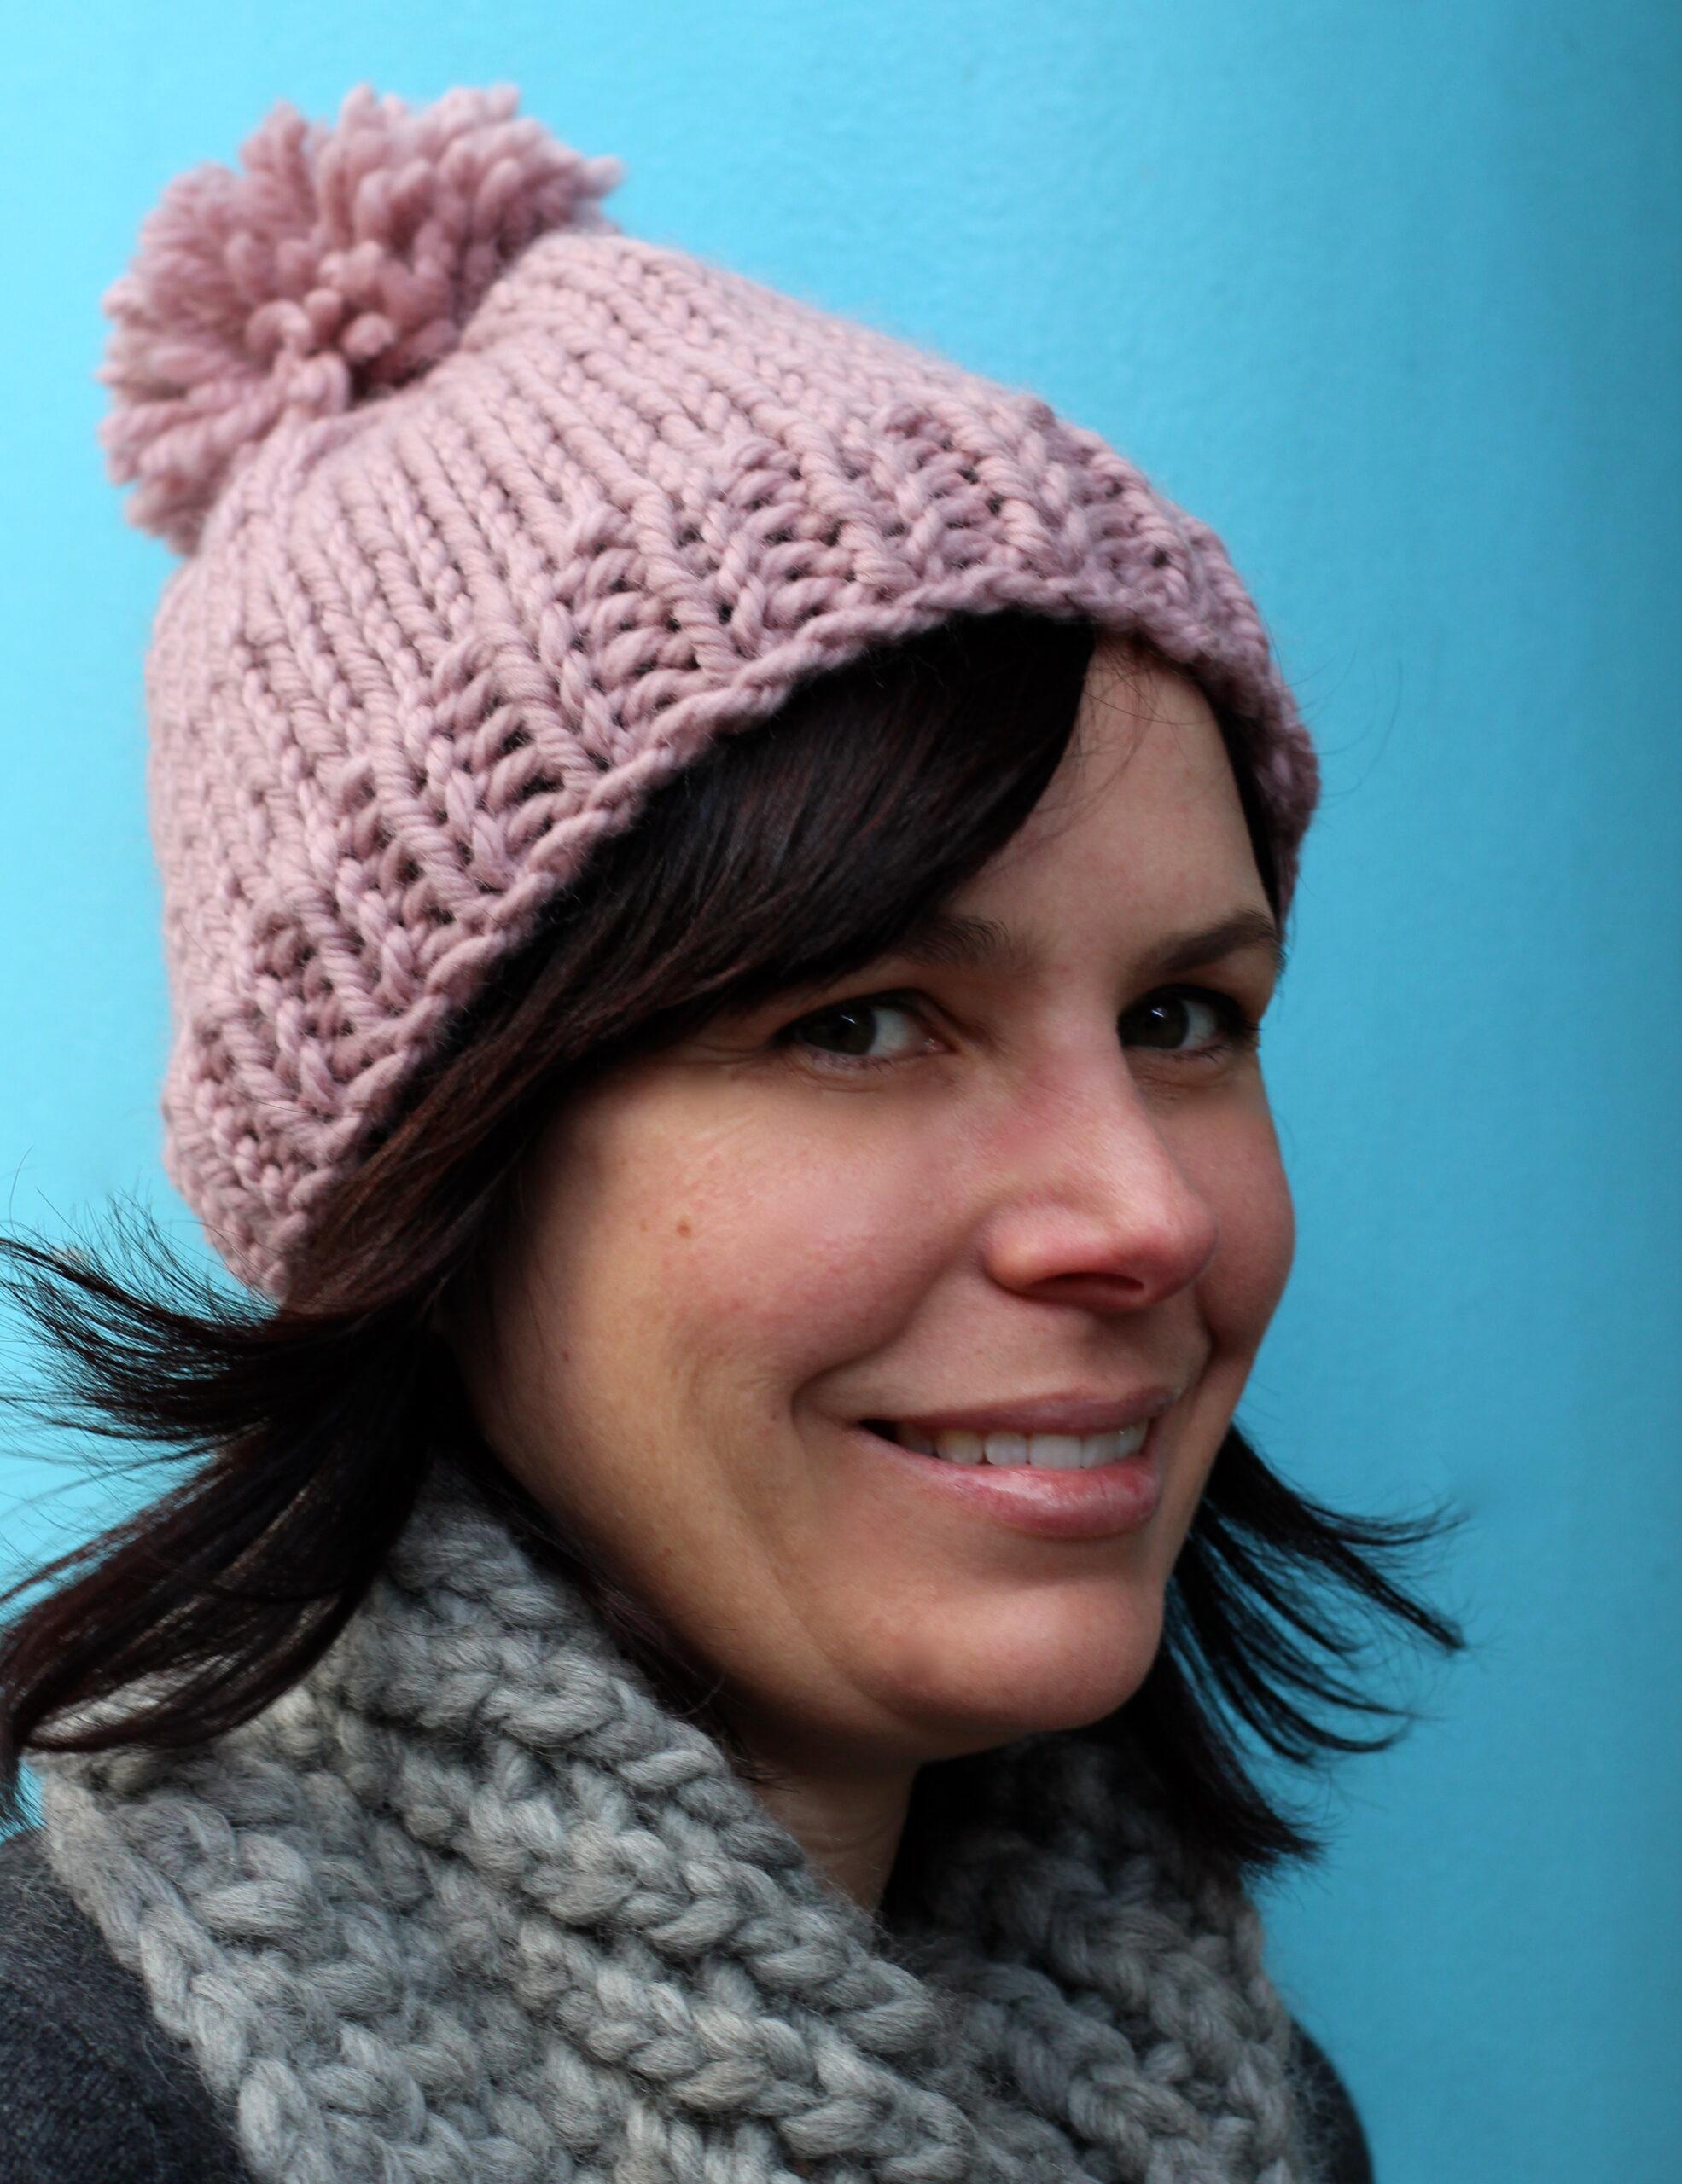 How to Knit Free Easy Hat knitting pattern for beginners Curious